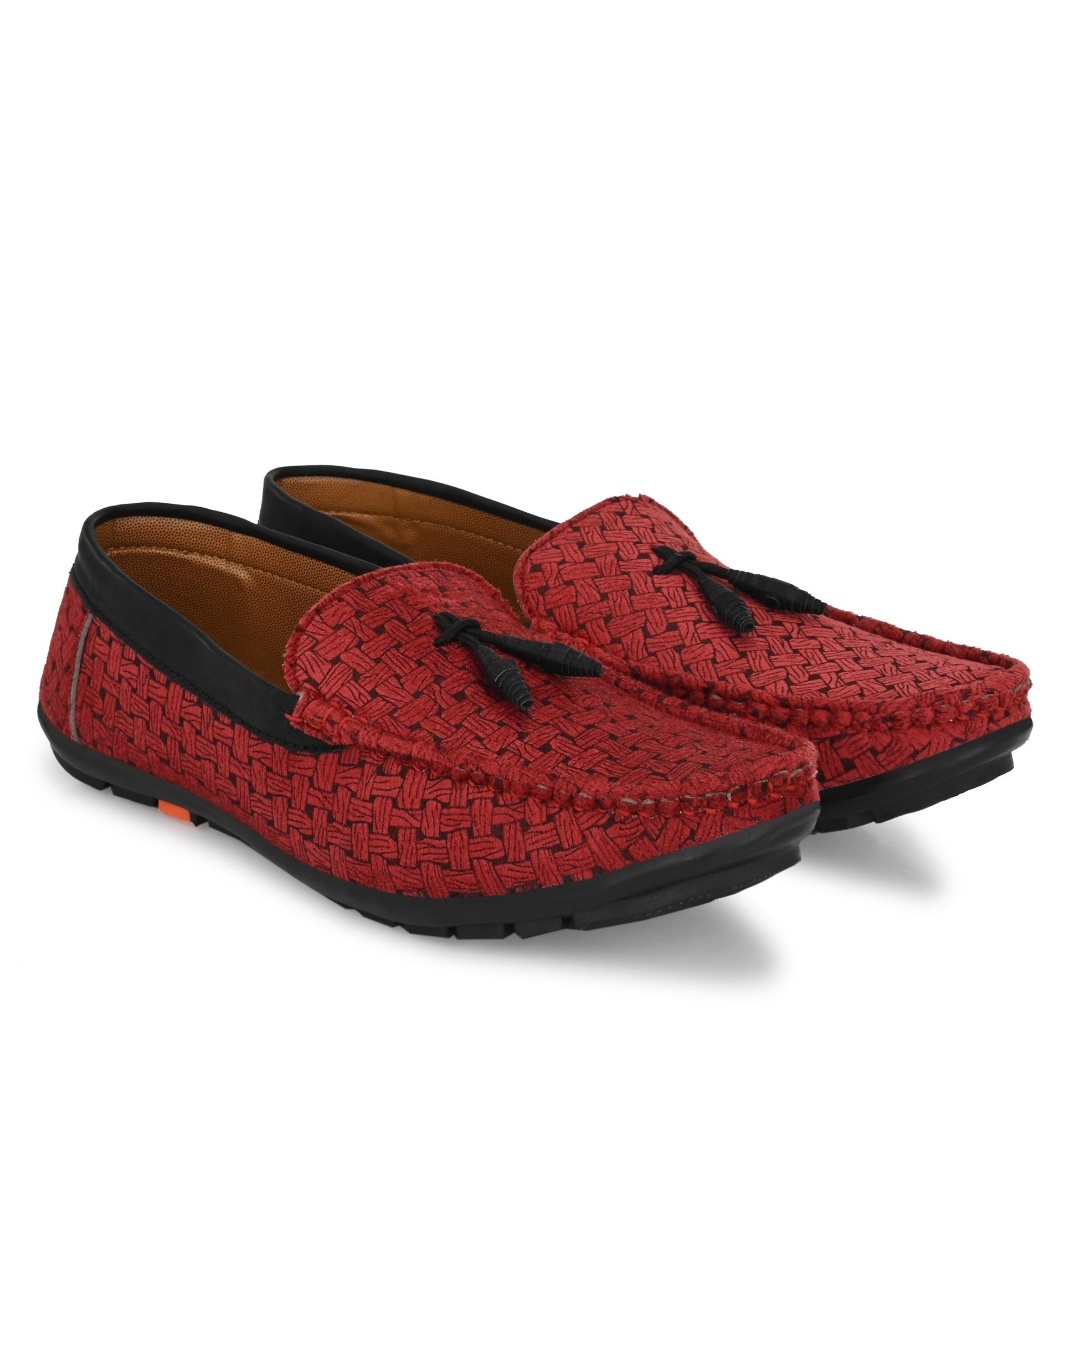 Shop Men's Red Printed Loafers